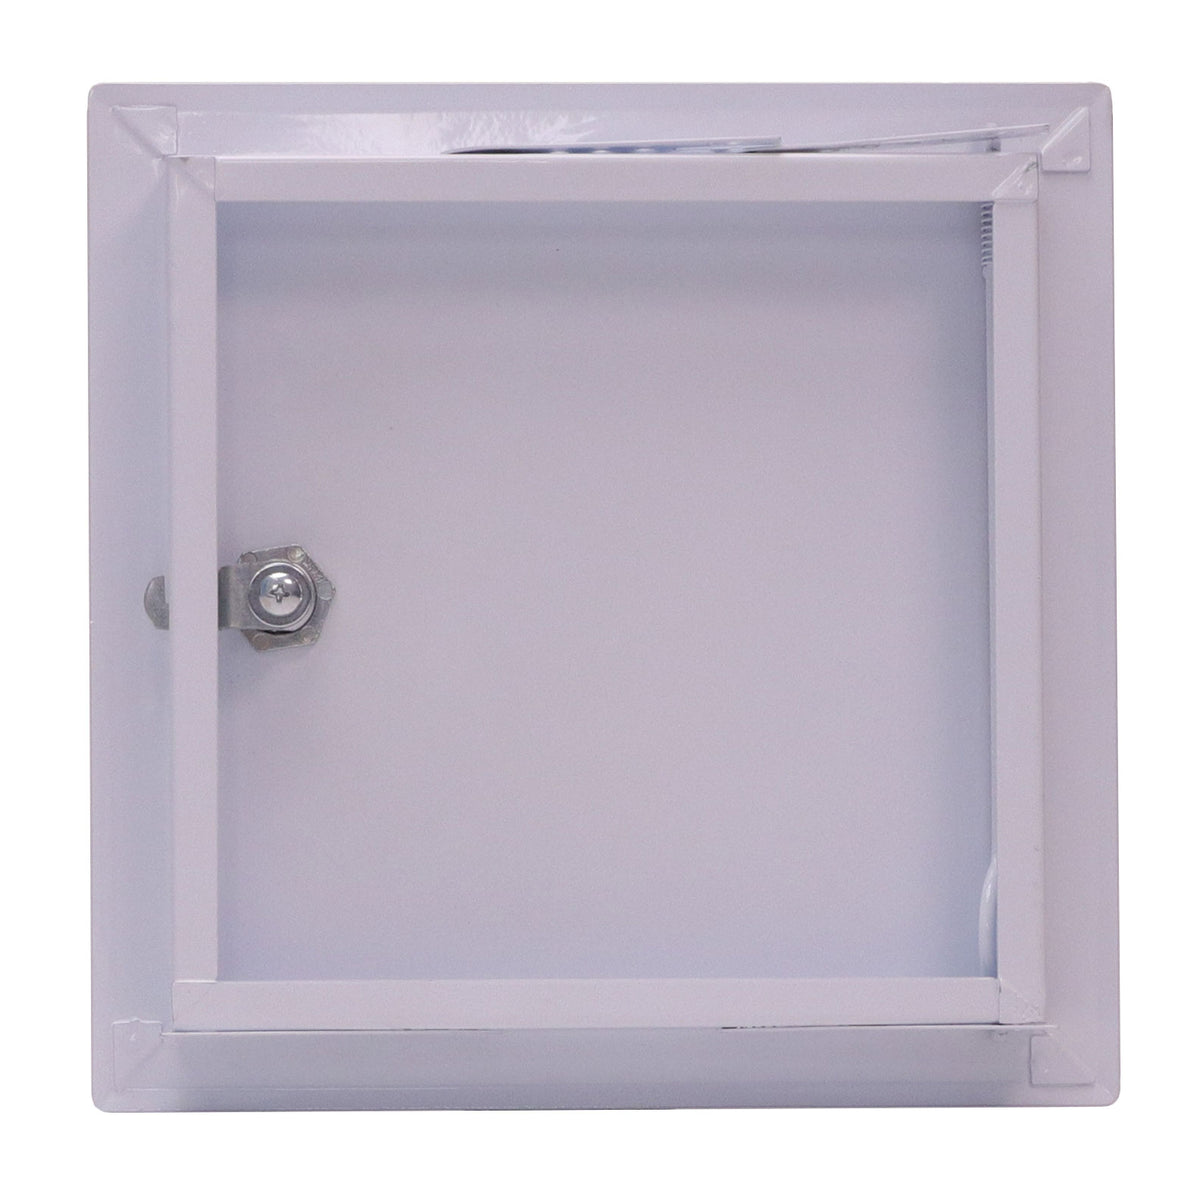 12&quot; X 12&quot; Steel Access Panel Removable Door For Wall / Ceiling Application (Lock and Key) With Frame - [Outer Dimensions: 13&quot; Width X 13&quot; Height]